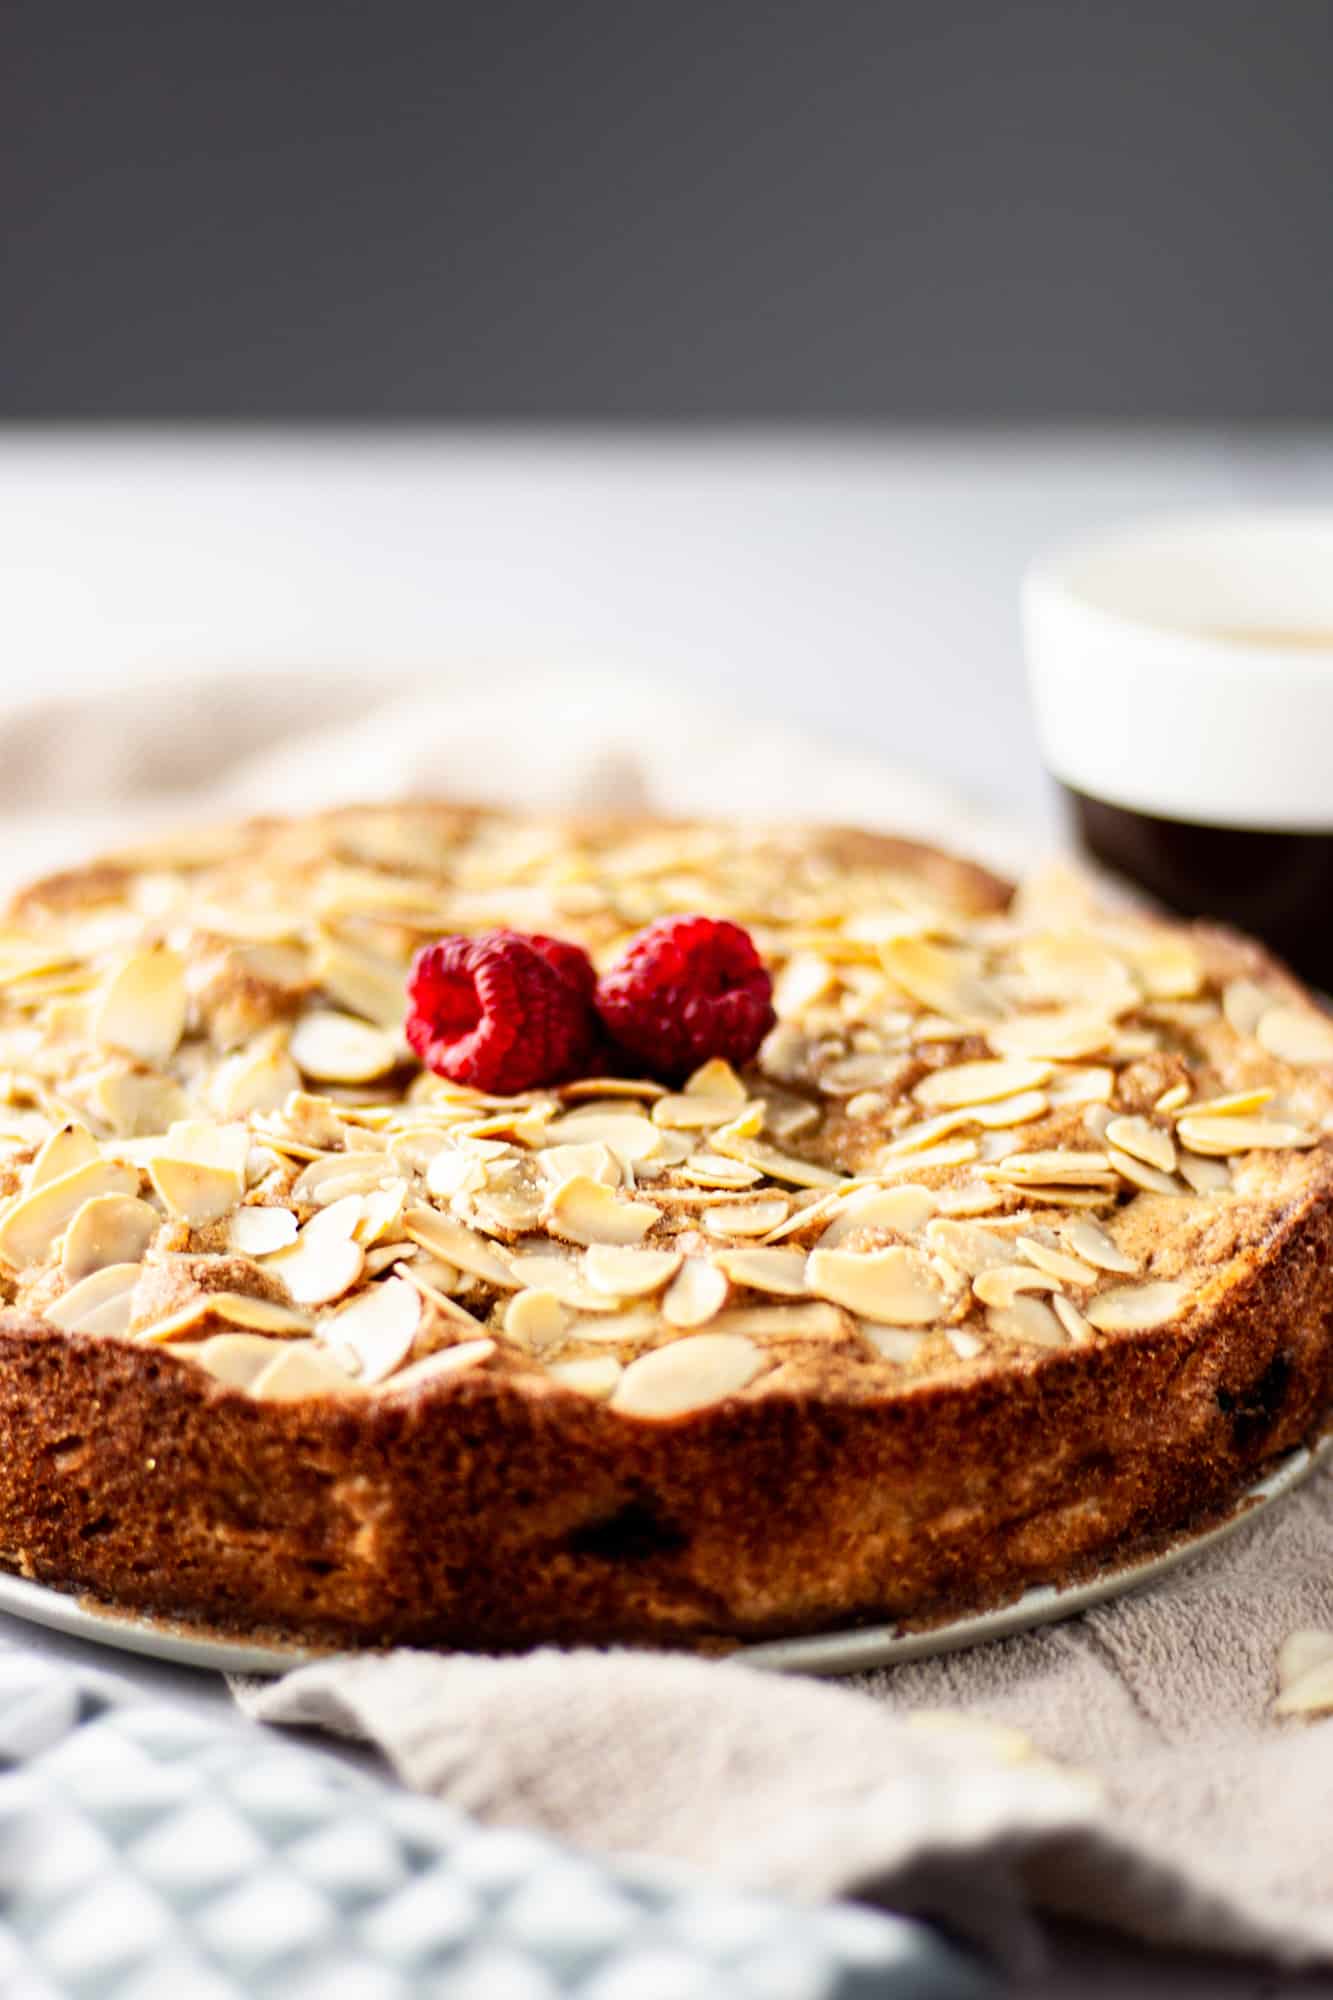 A fresh out of the oven pear and raspberry cake with sliced almonds and raspberries on top next to a cup of coffee.